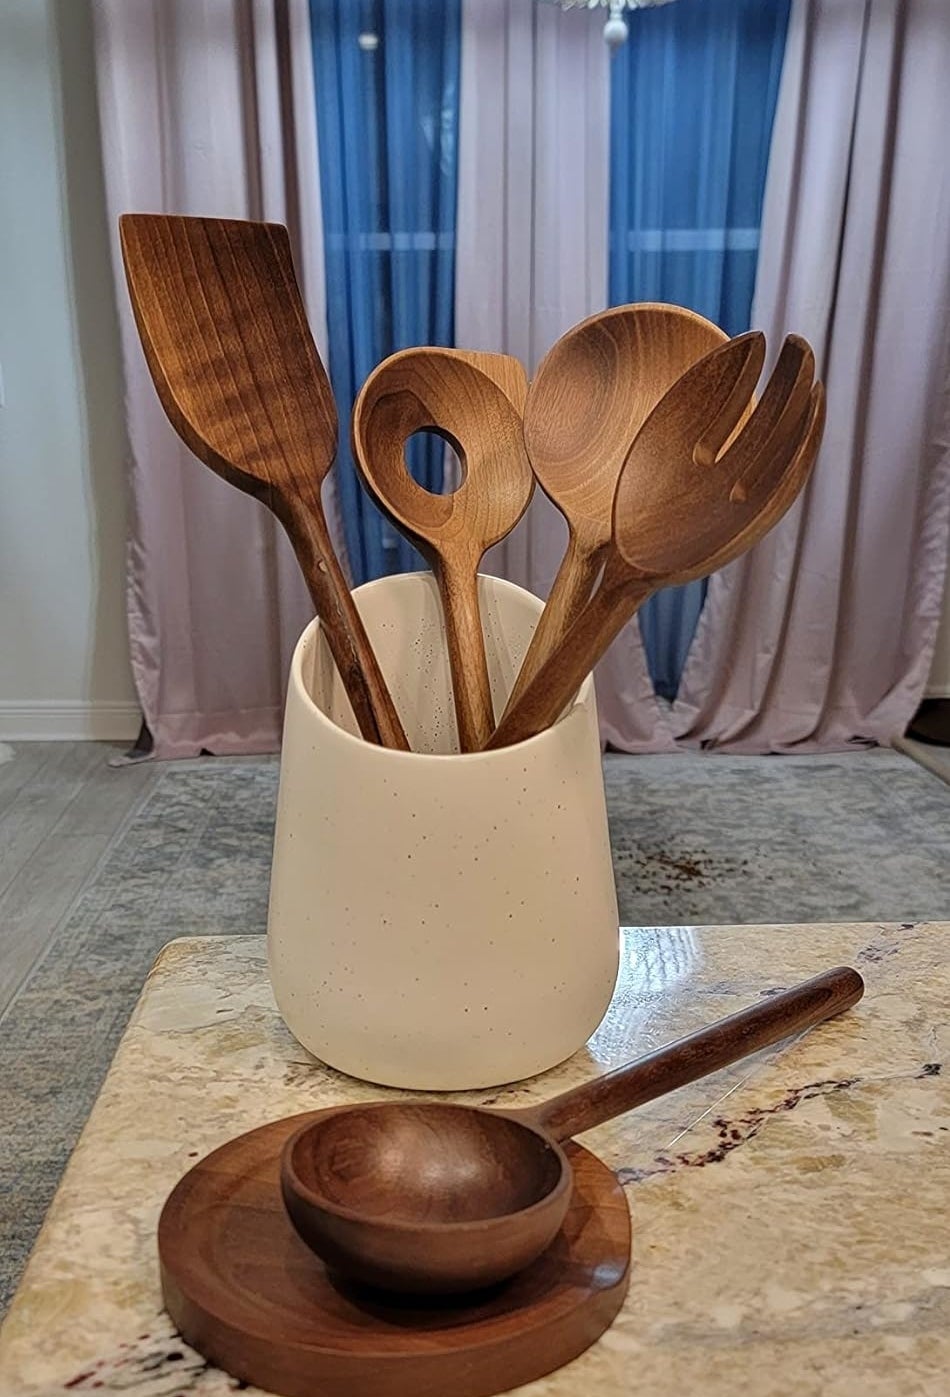 A set of wooden cooking utensils in a white holder with a wooden rest on a kitchen counter